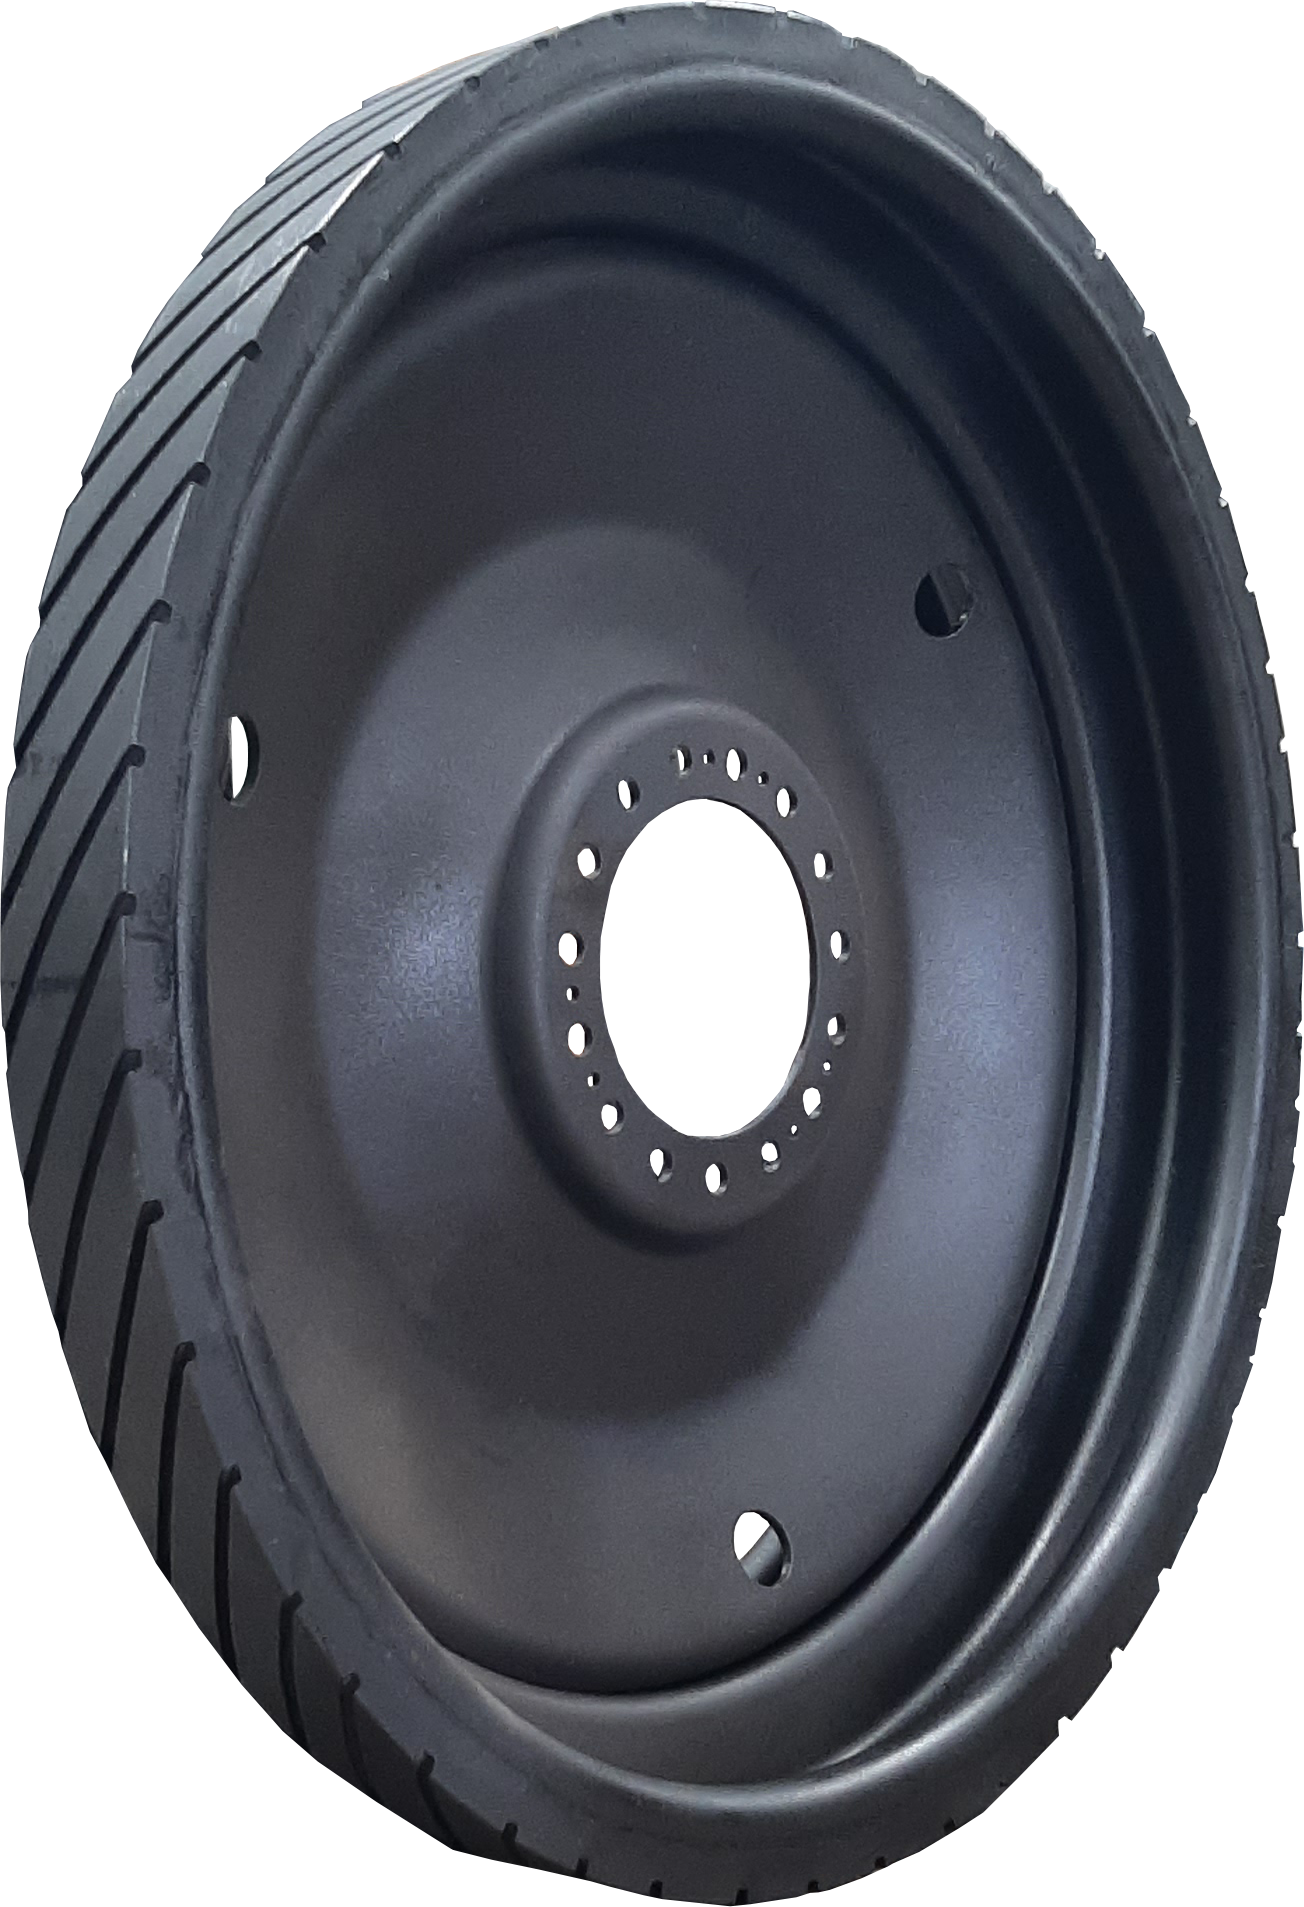 Example image for Drive wheel for Caterpillar 35-55 series tractors